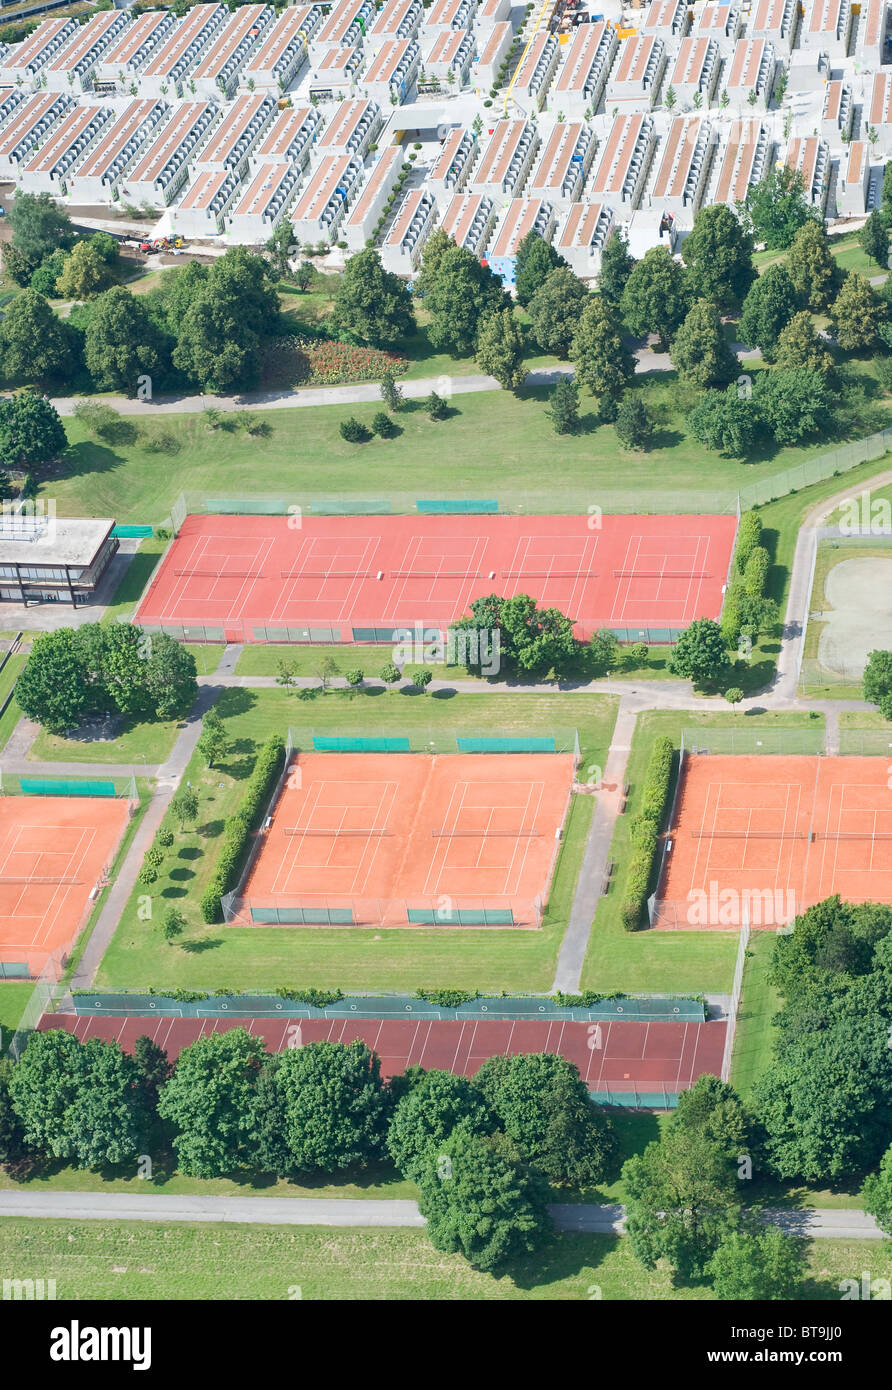 Aerial View with Tennis Courts and Residential Housing Stock Photo